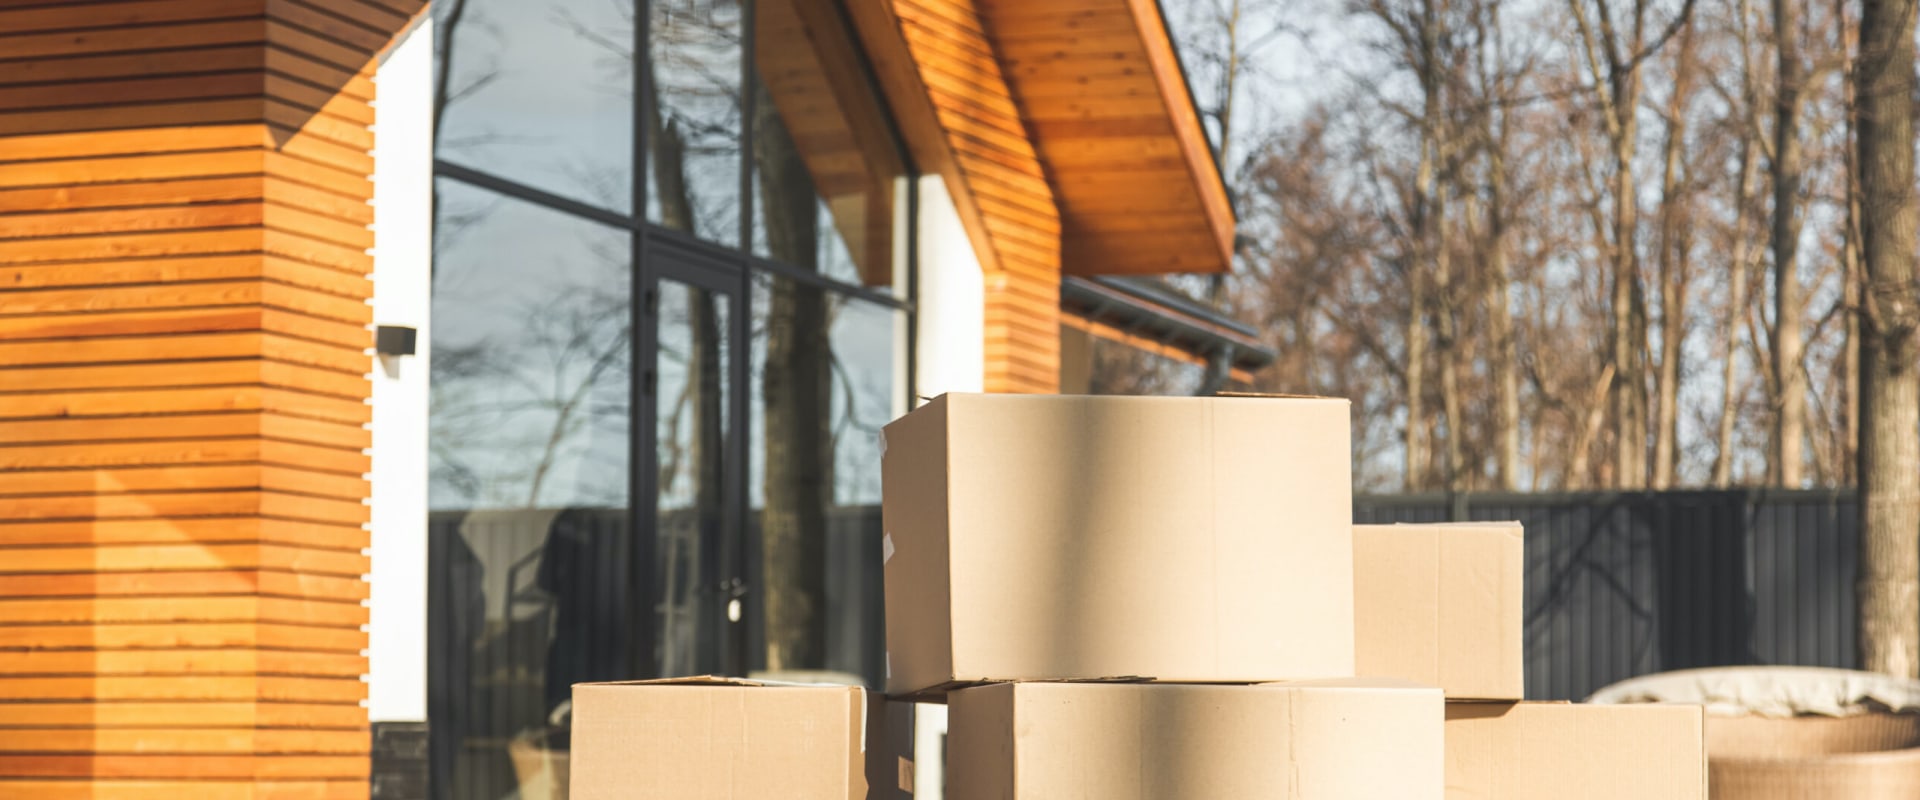 Licensed and Insured Moving Companies in Massachusetts